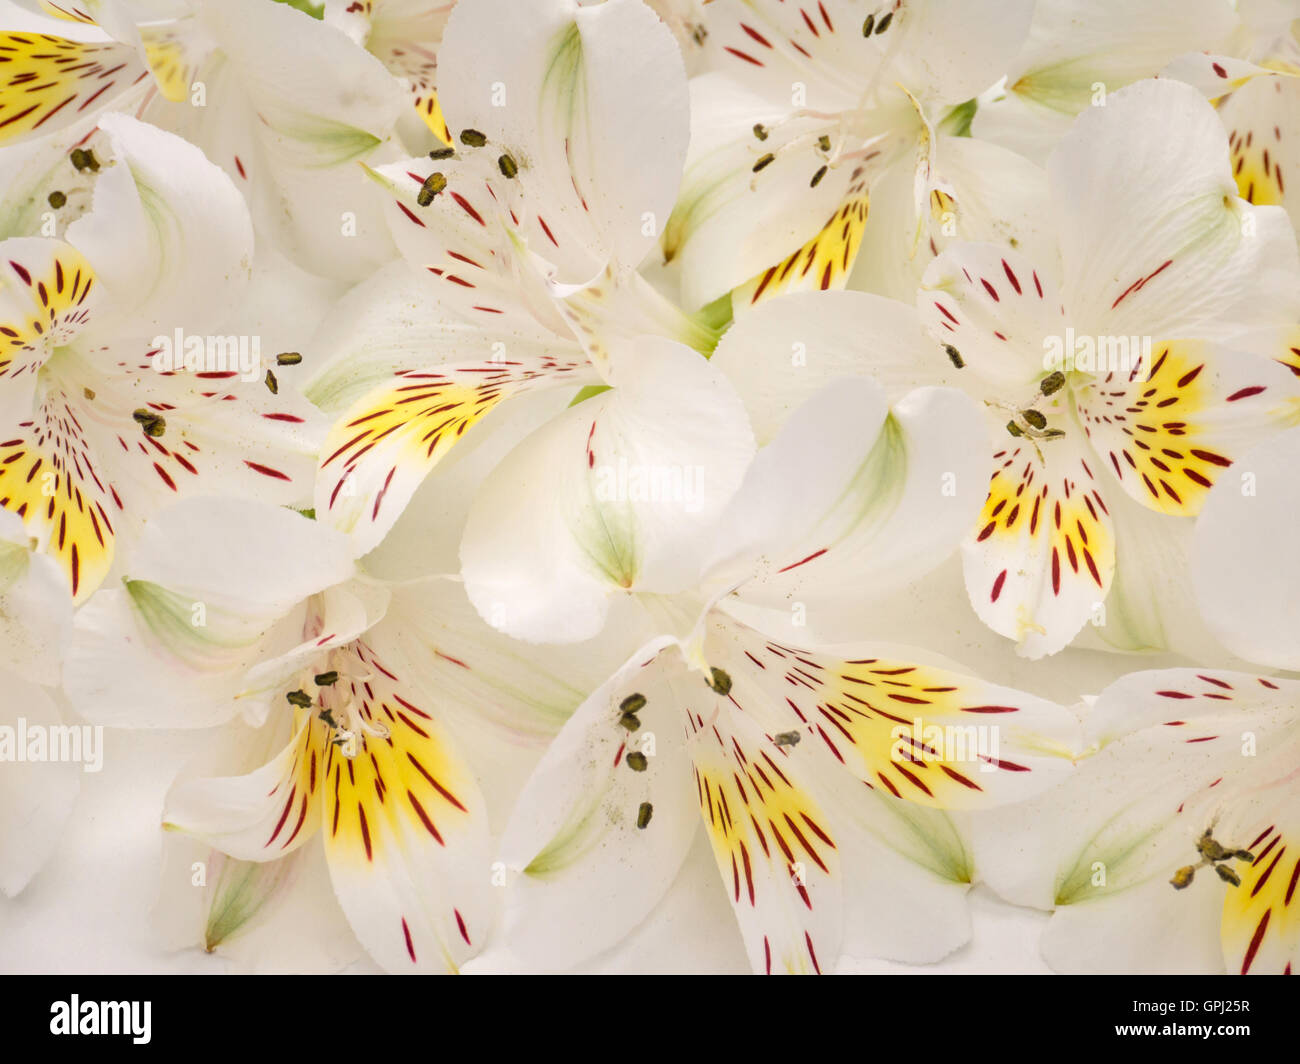 White and yellow alstroemeria flowers bouquet background Stock Photo